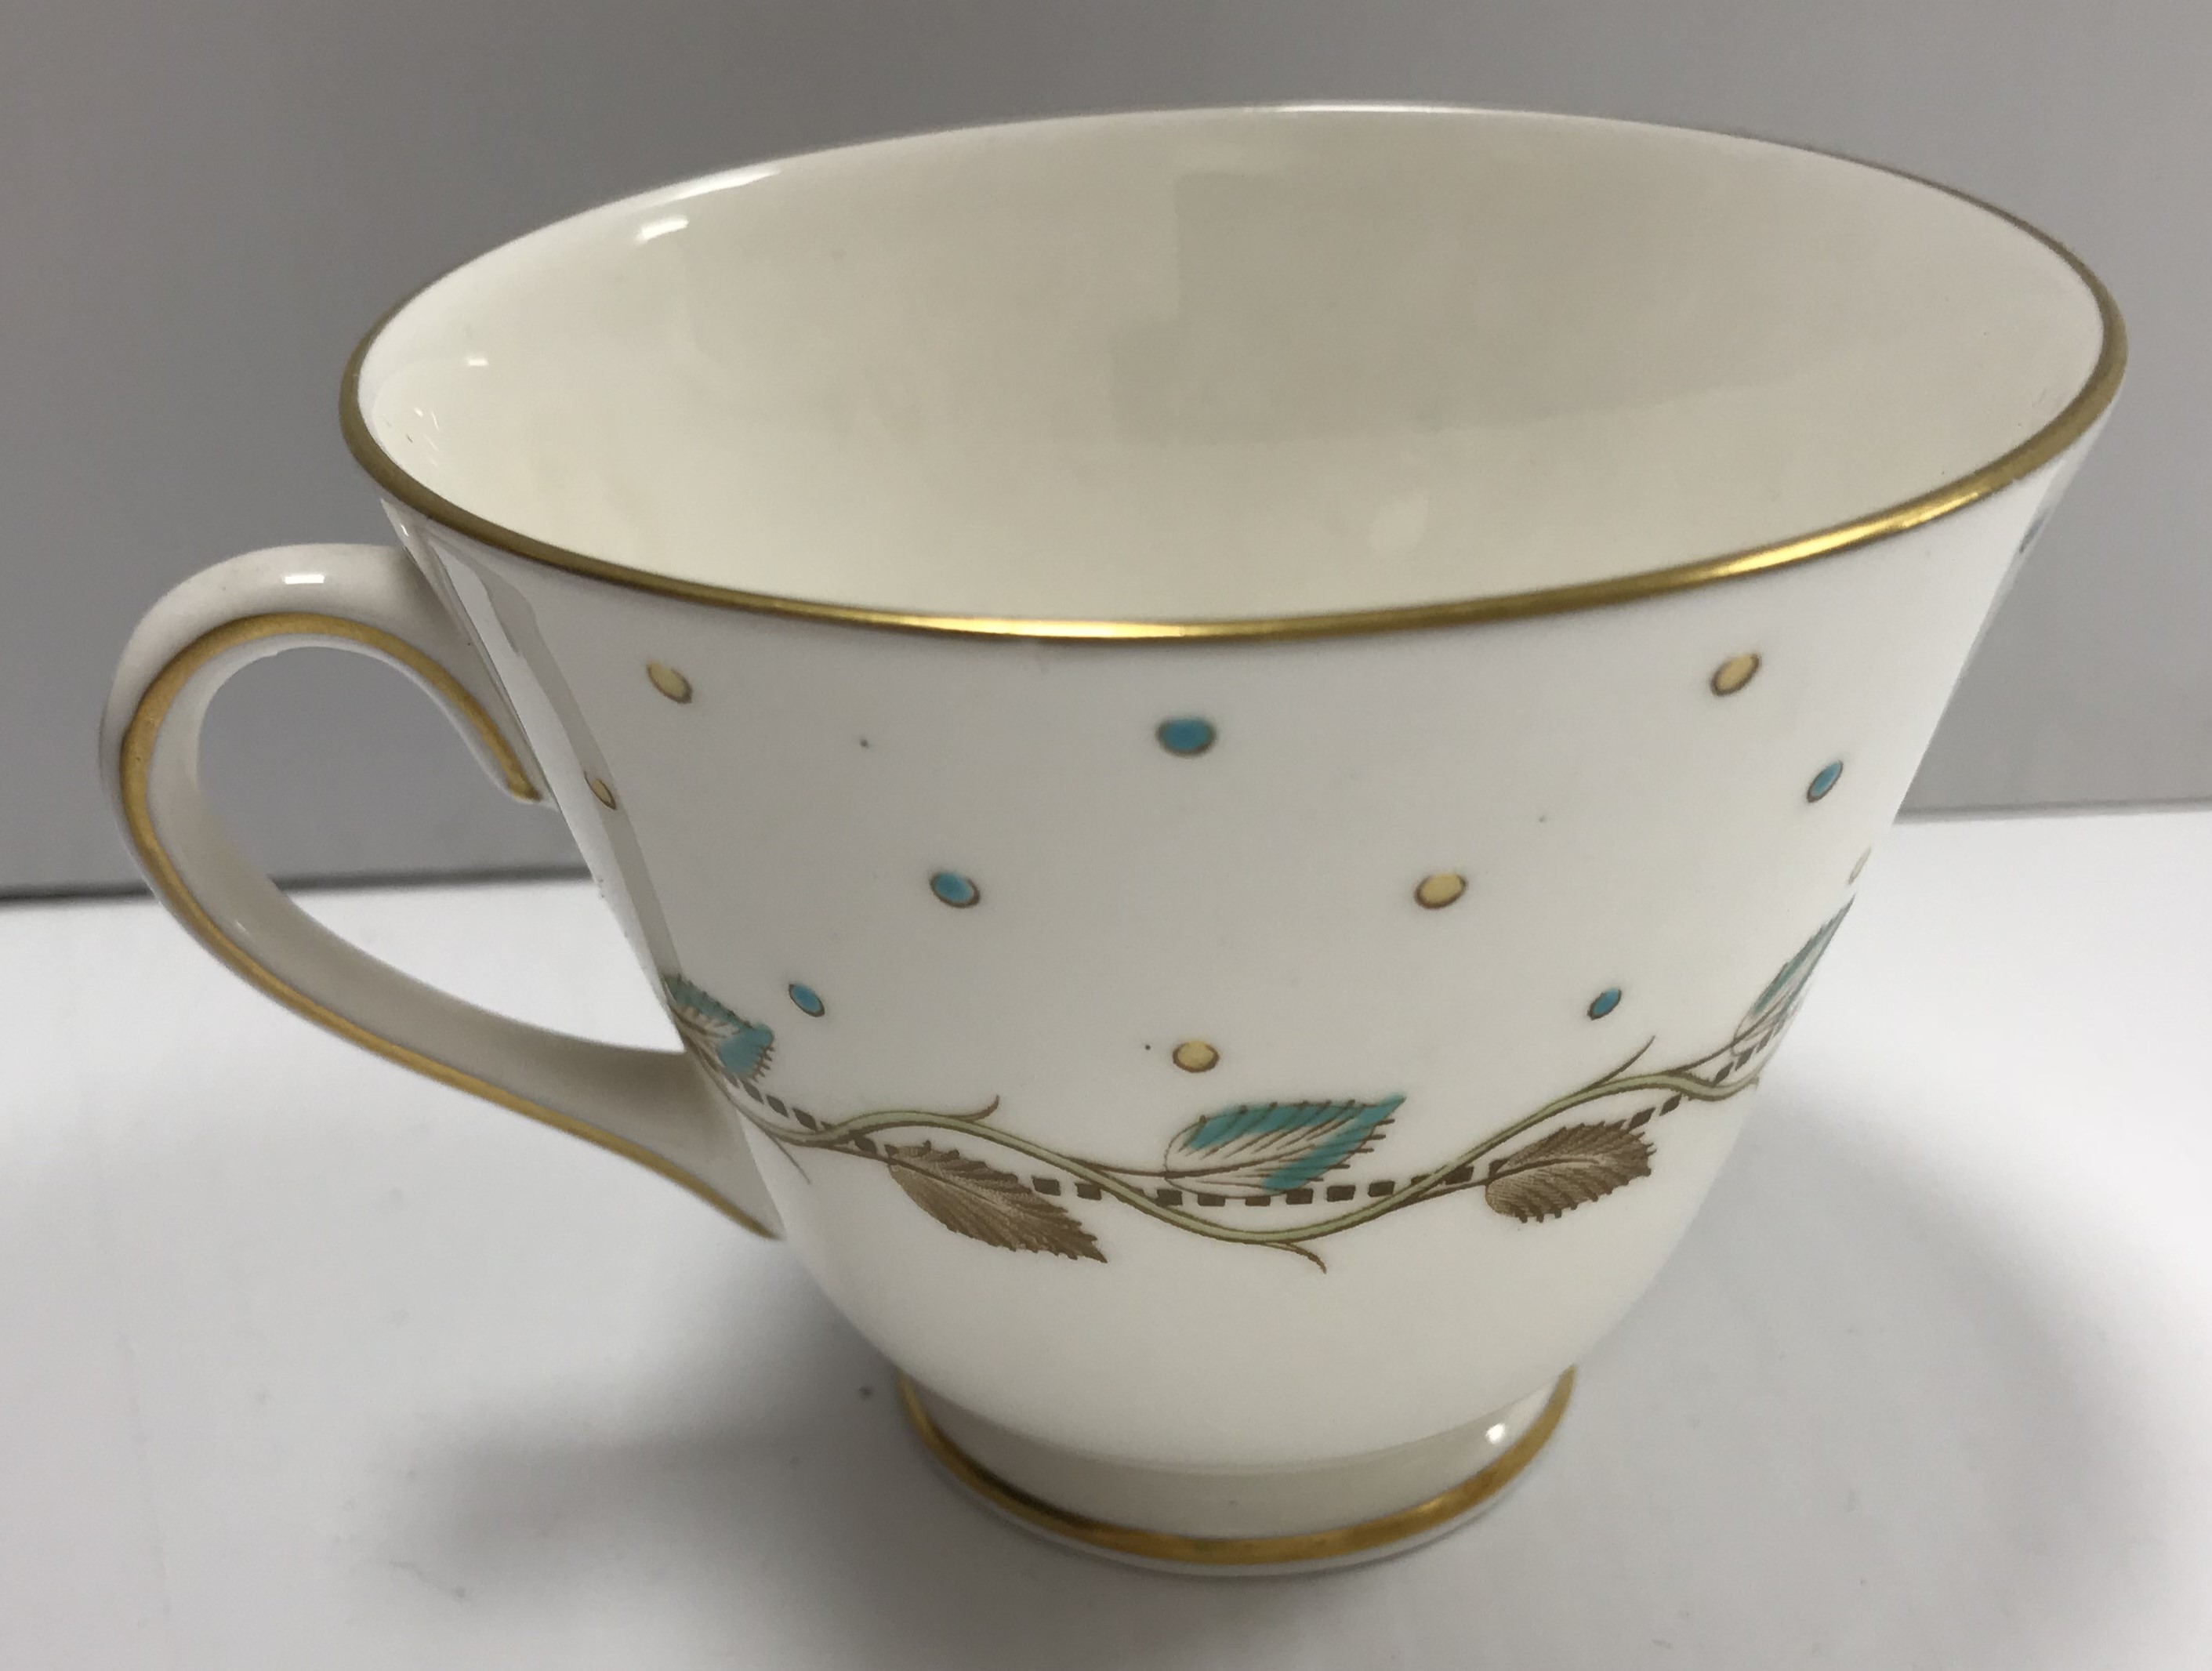 A Royal Doulton "Harmony Leaf" (H4864) six place tea set comprising cups, saucers, side plates, - Image 7 of 7